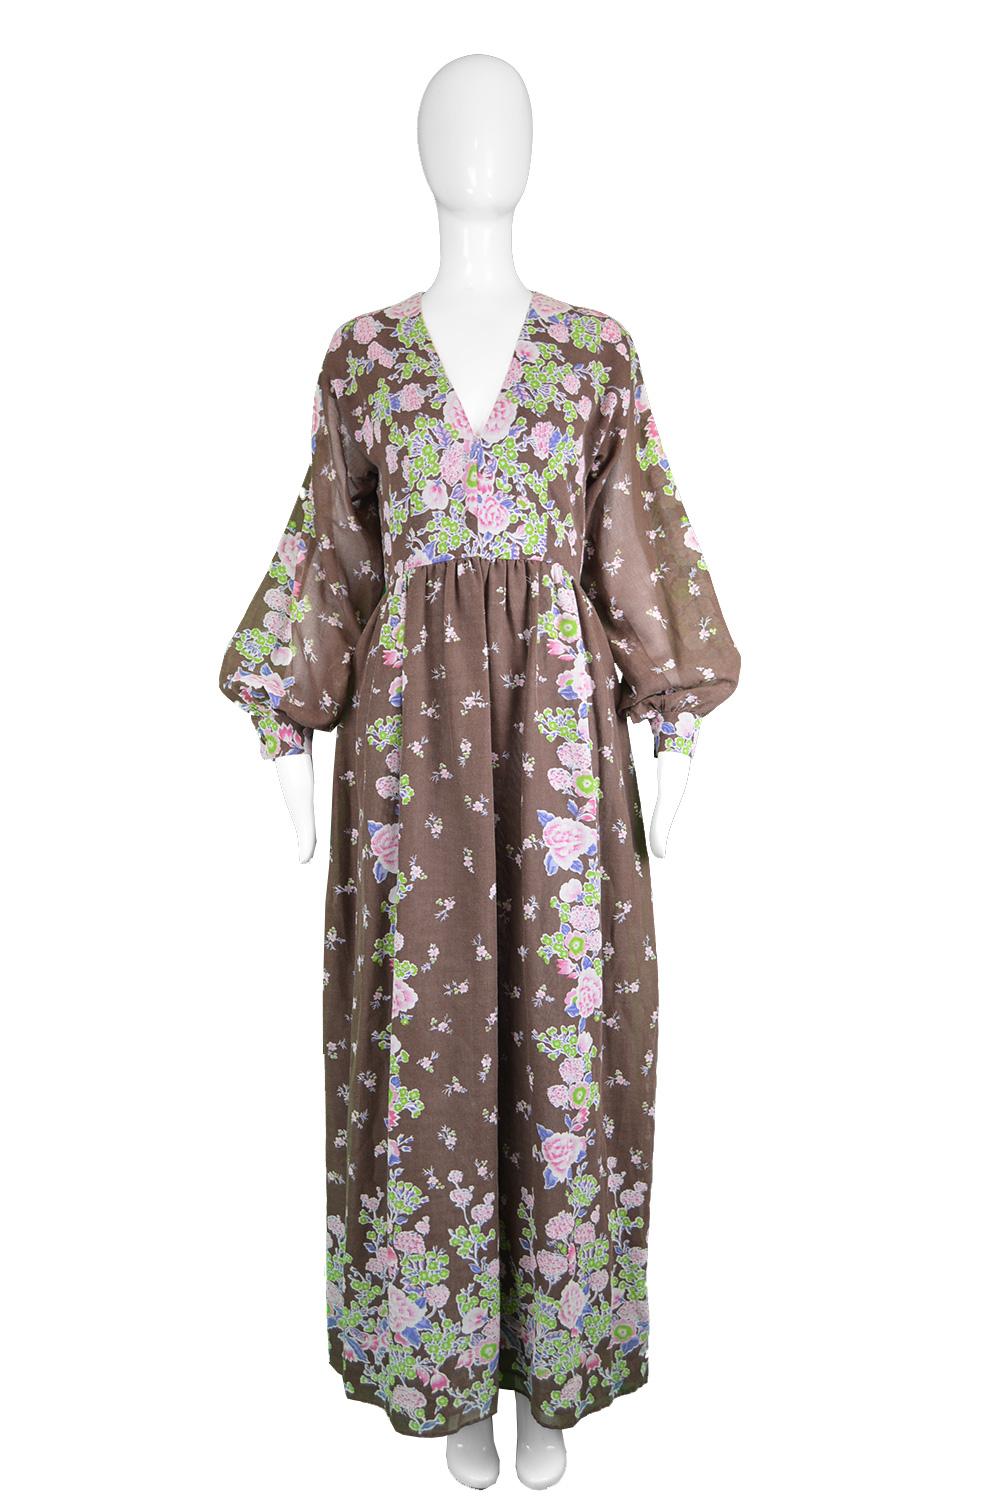 A beautiful vintage maxi length boho dress from the 70s by luxury American fashion designer, Albert Capraro who designed for Oscar de La Renta before starting his own label in 1974, and dressed the likes of Betty Ford and Polly Bergen. In a brown